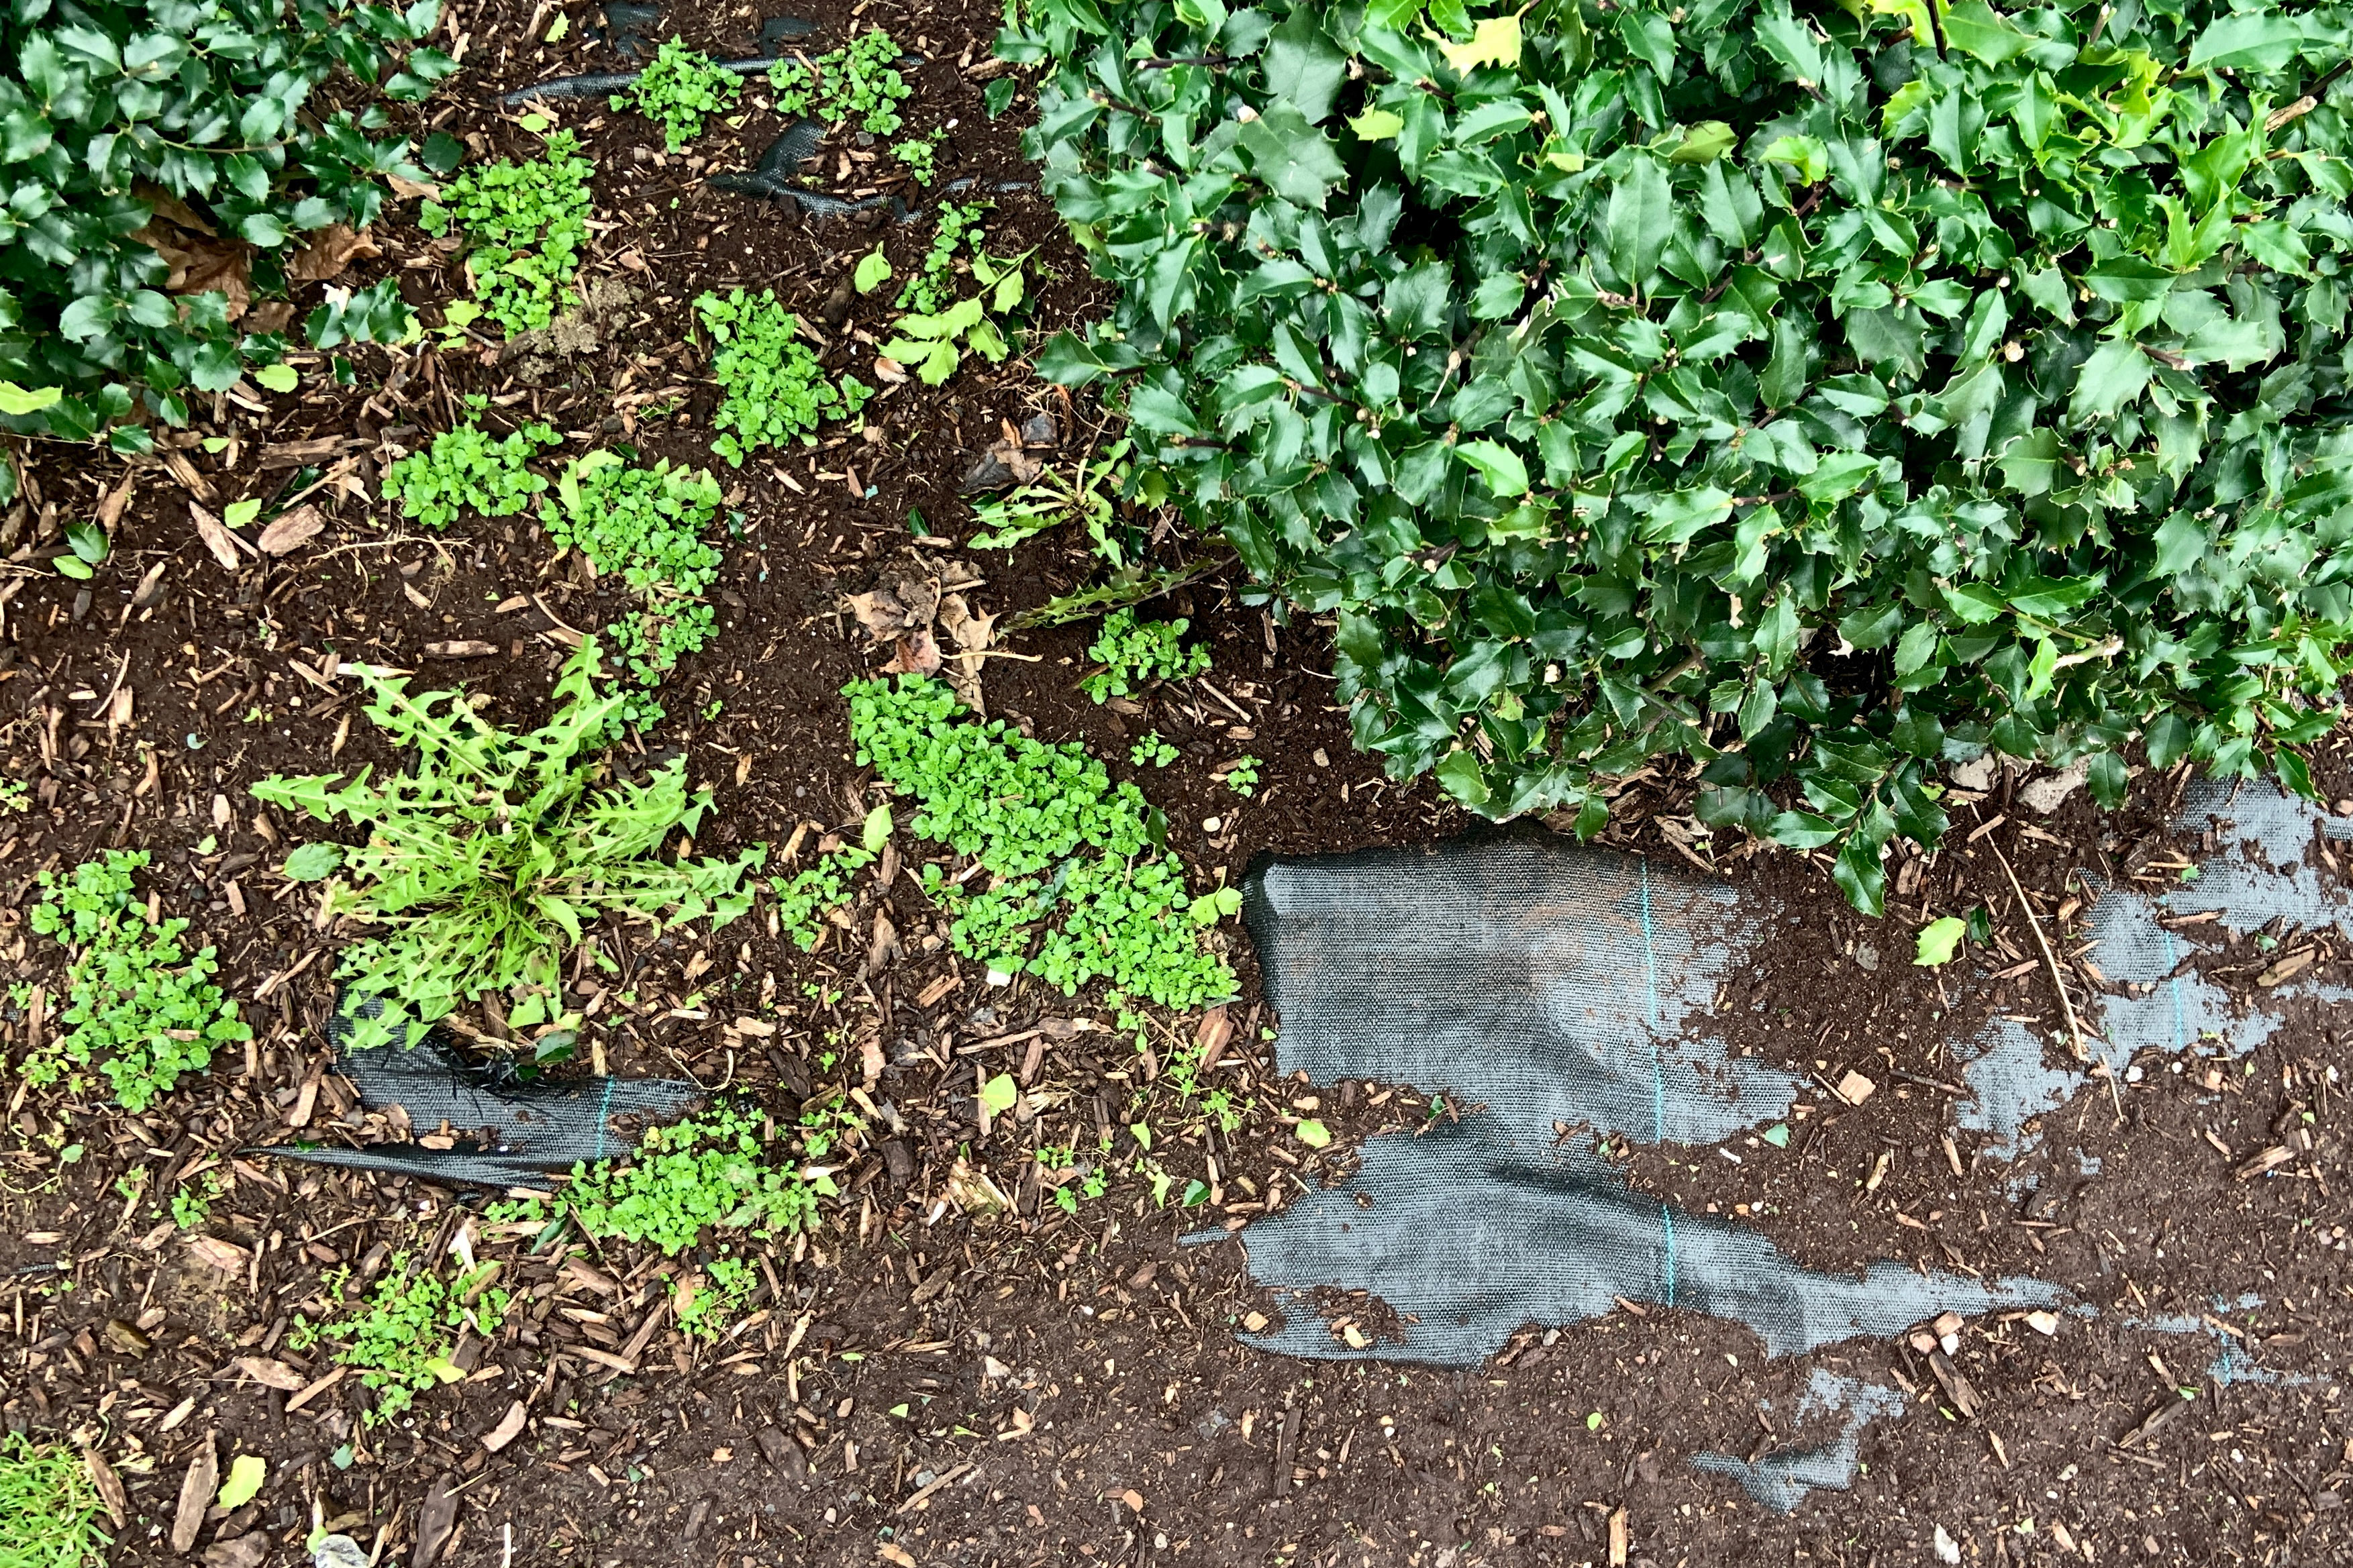 Garden bed with holly bushes and weeds growing over black landscape fabric